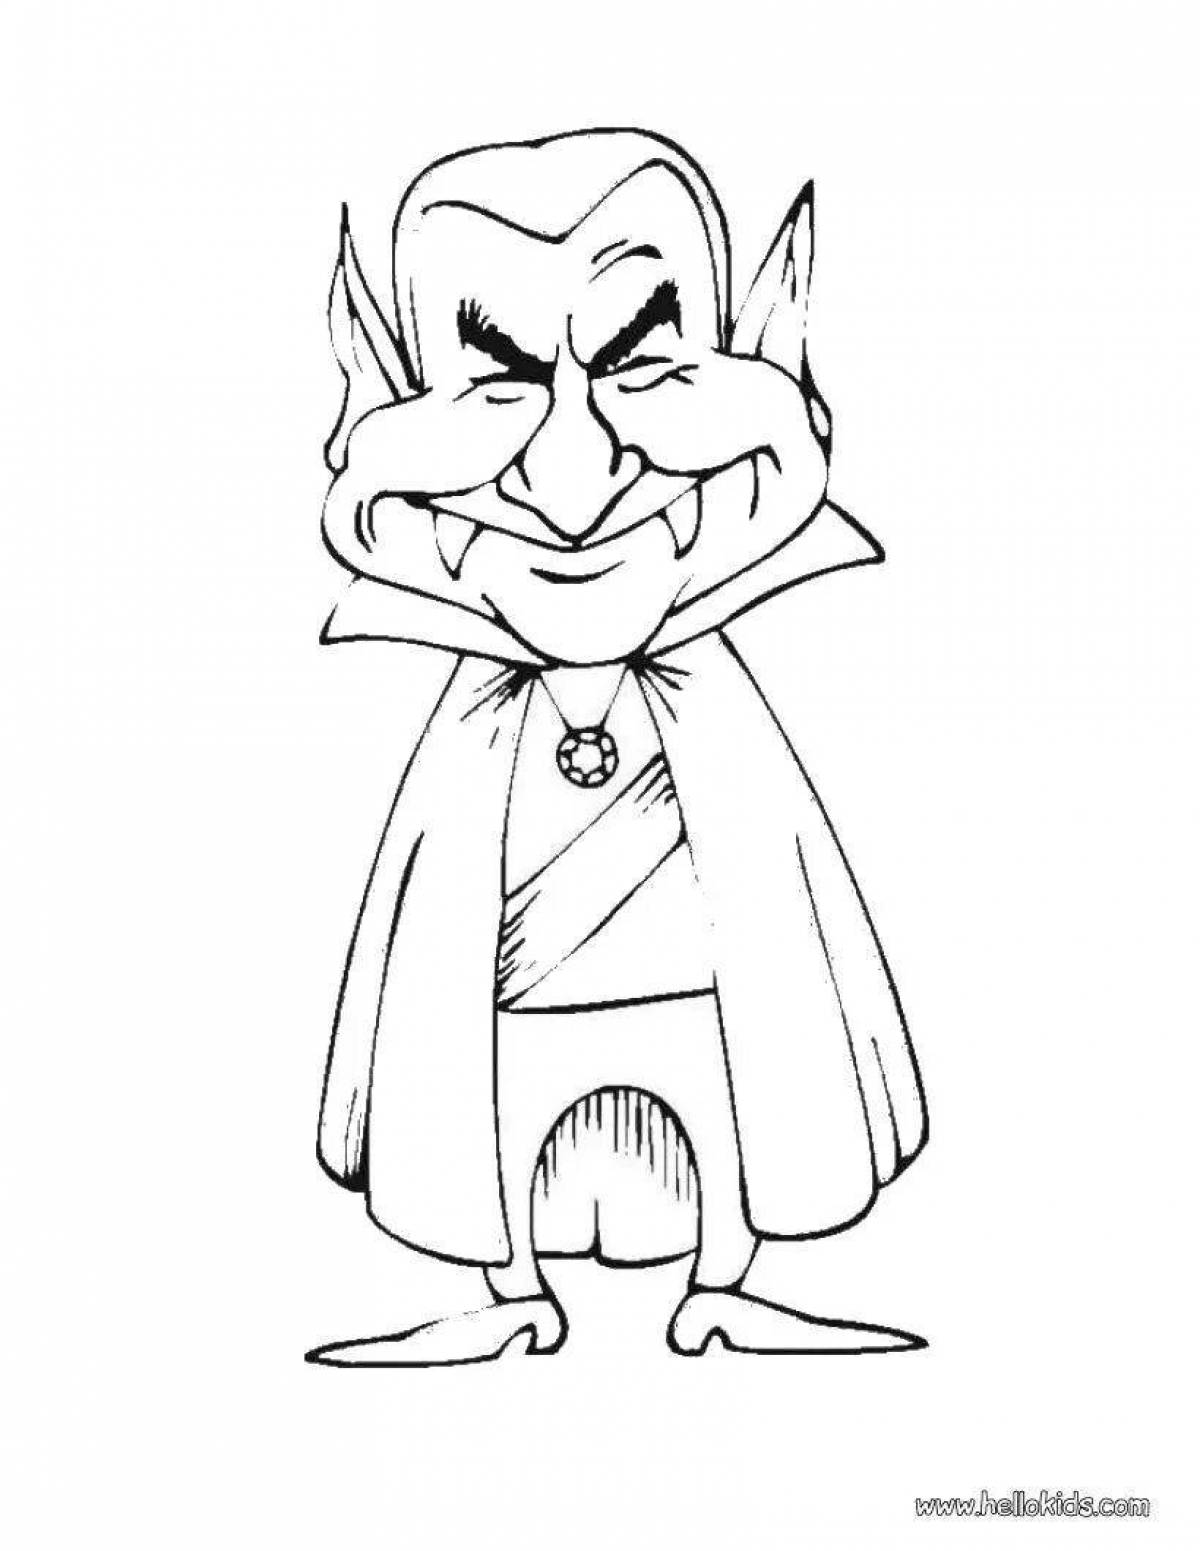 Nerving dracula coloring page